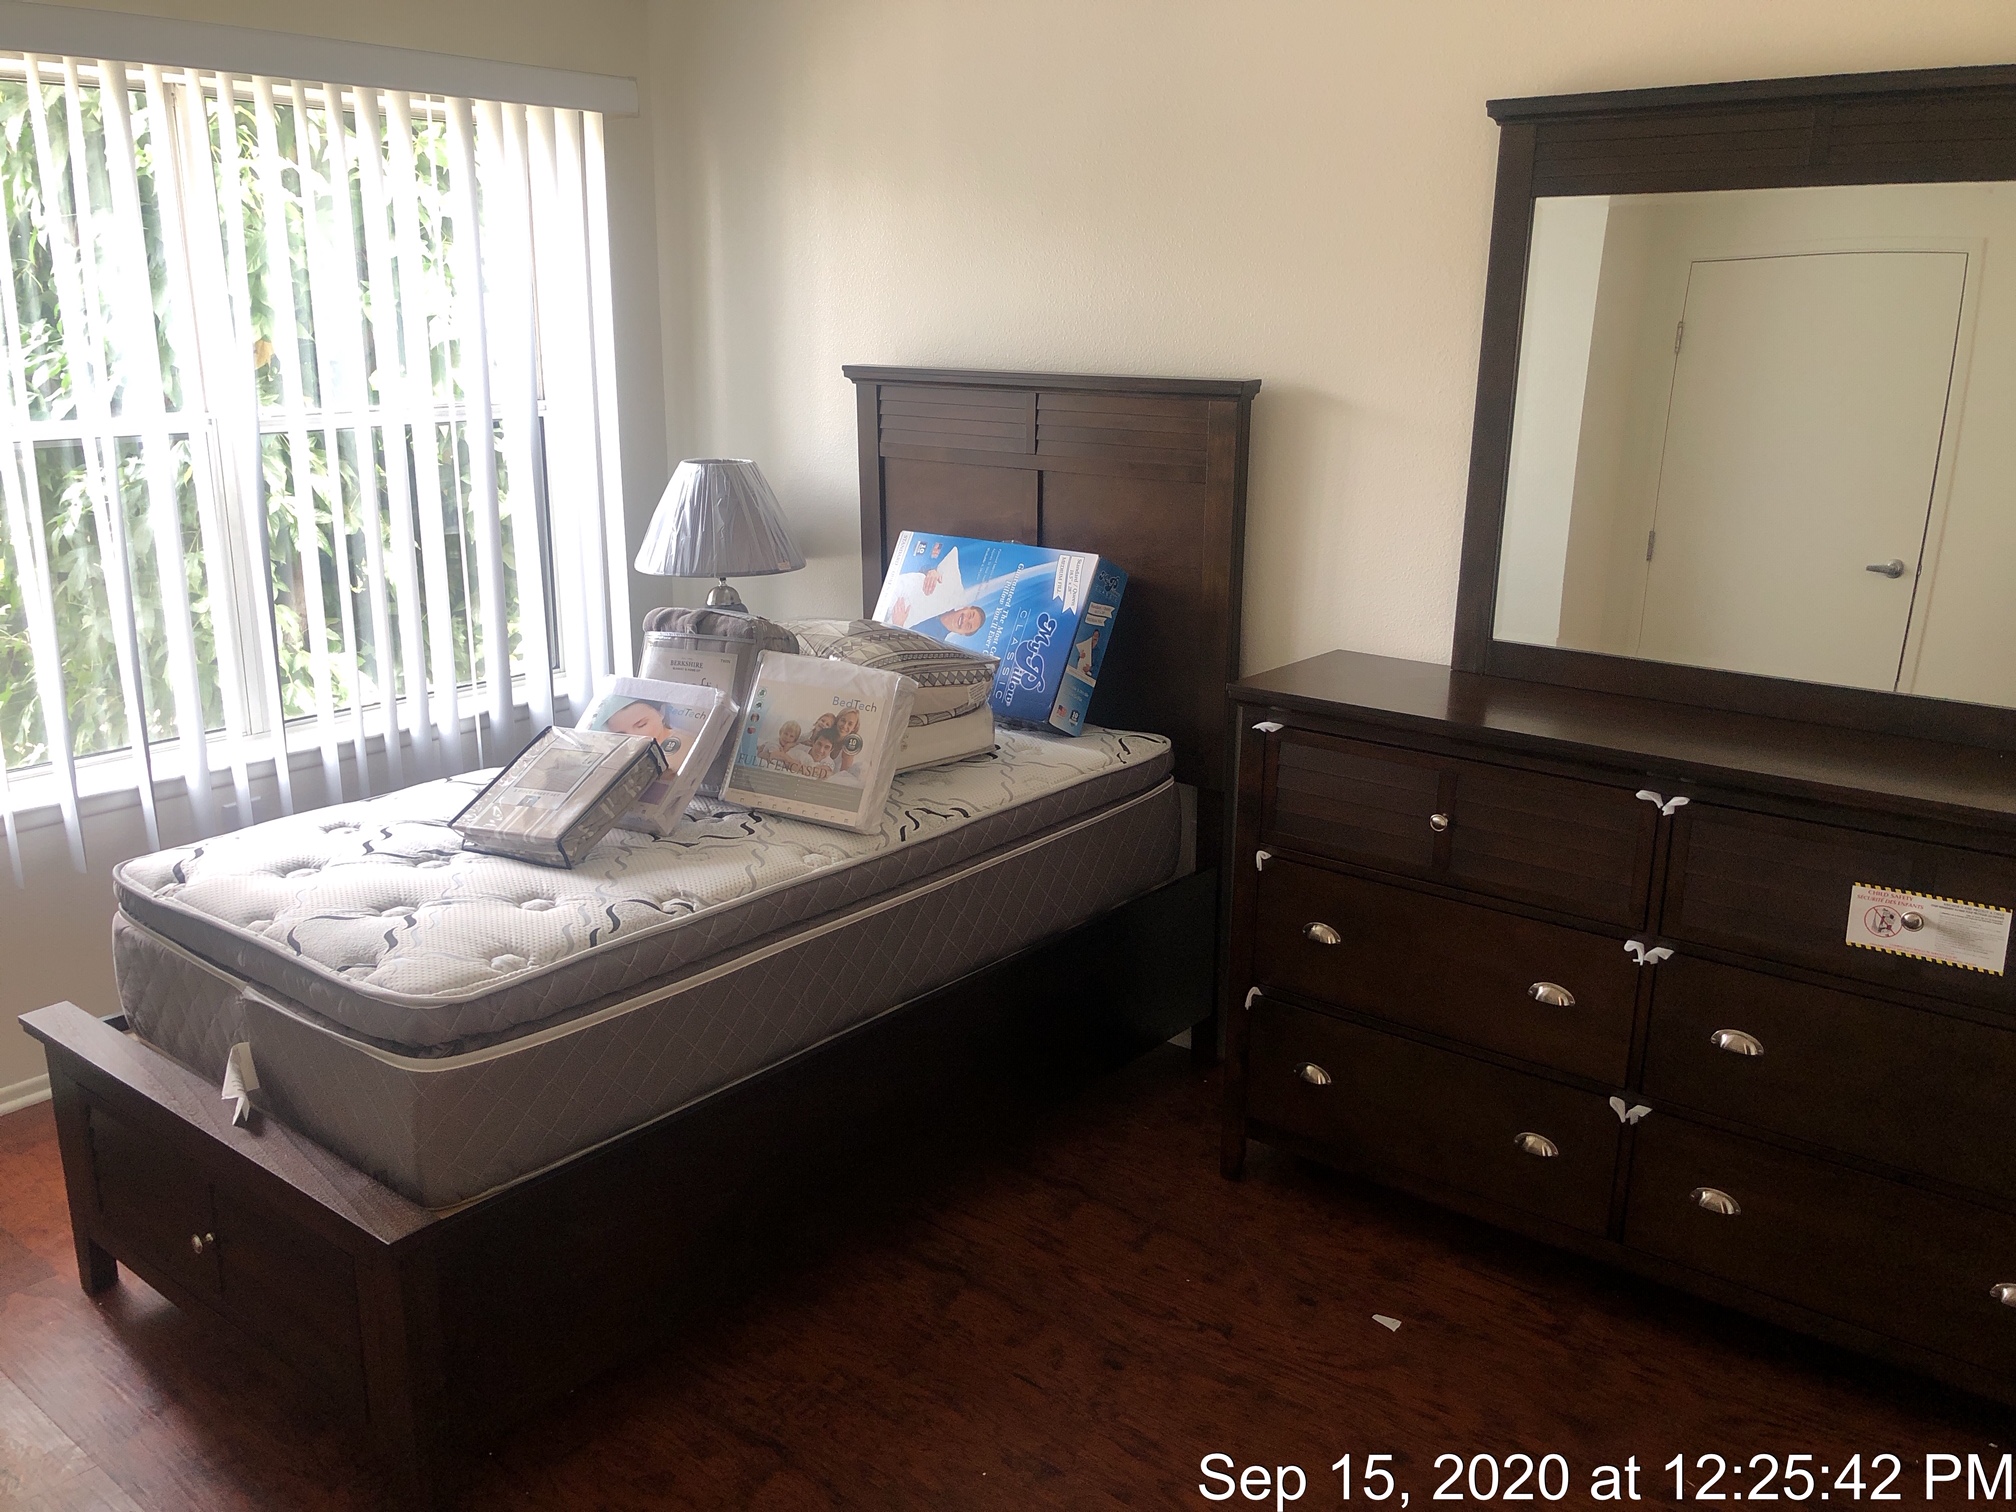 HFL Palms Court - View of a bedroom with wooden floors and a window with blinds. Room has a bed frame with a mattress, a lamp, and a drawer with a mirror.